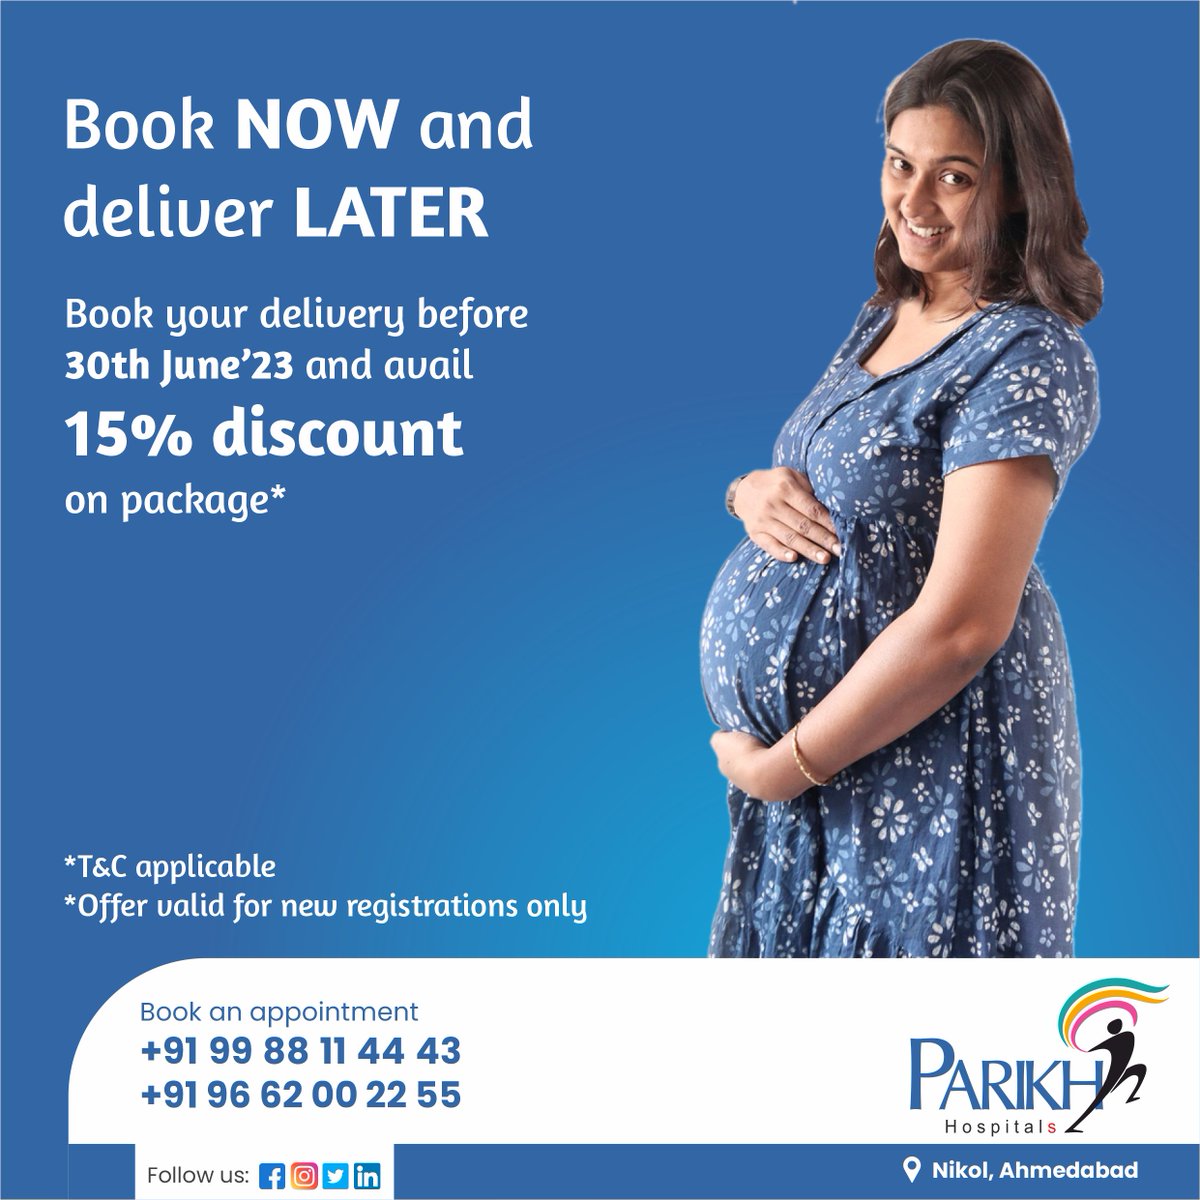 Book Now and deliver Later Book your delivery before 30th June 2023 and avail 15% discount on package* *T&C Applicable *Offer valid for new registrations only #ParikhHospitals #nikol #offer #ivfpackage #gyneccare #besthospital #prepregnancycare #advancecare #bestgynecdoctor